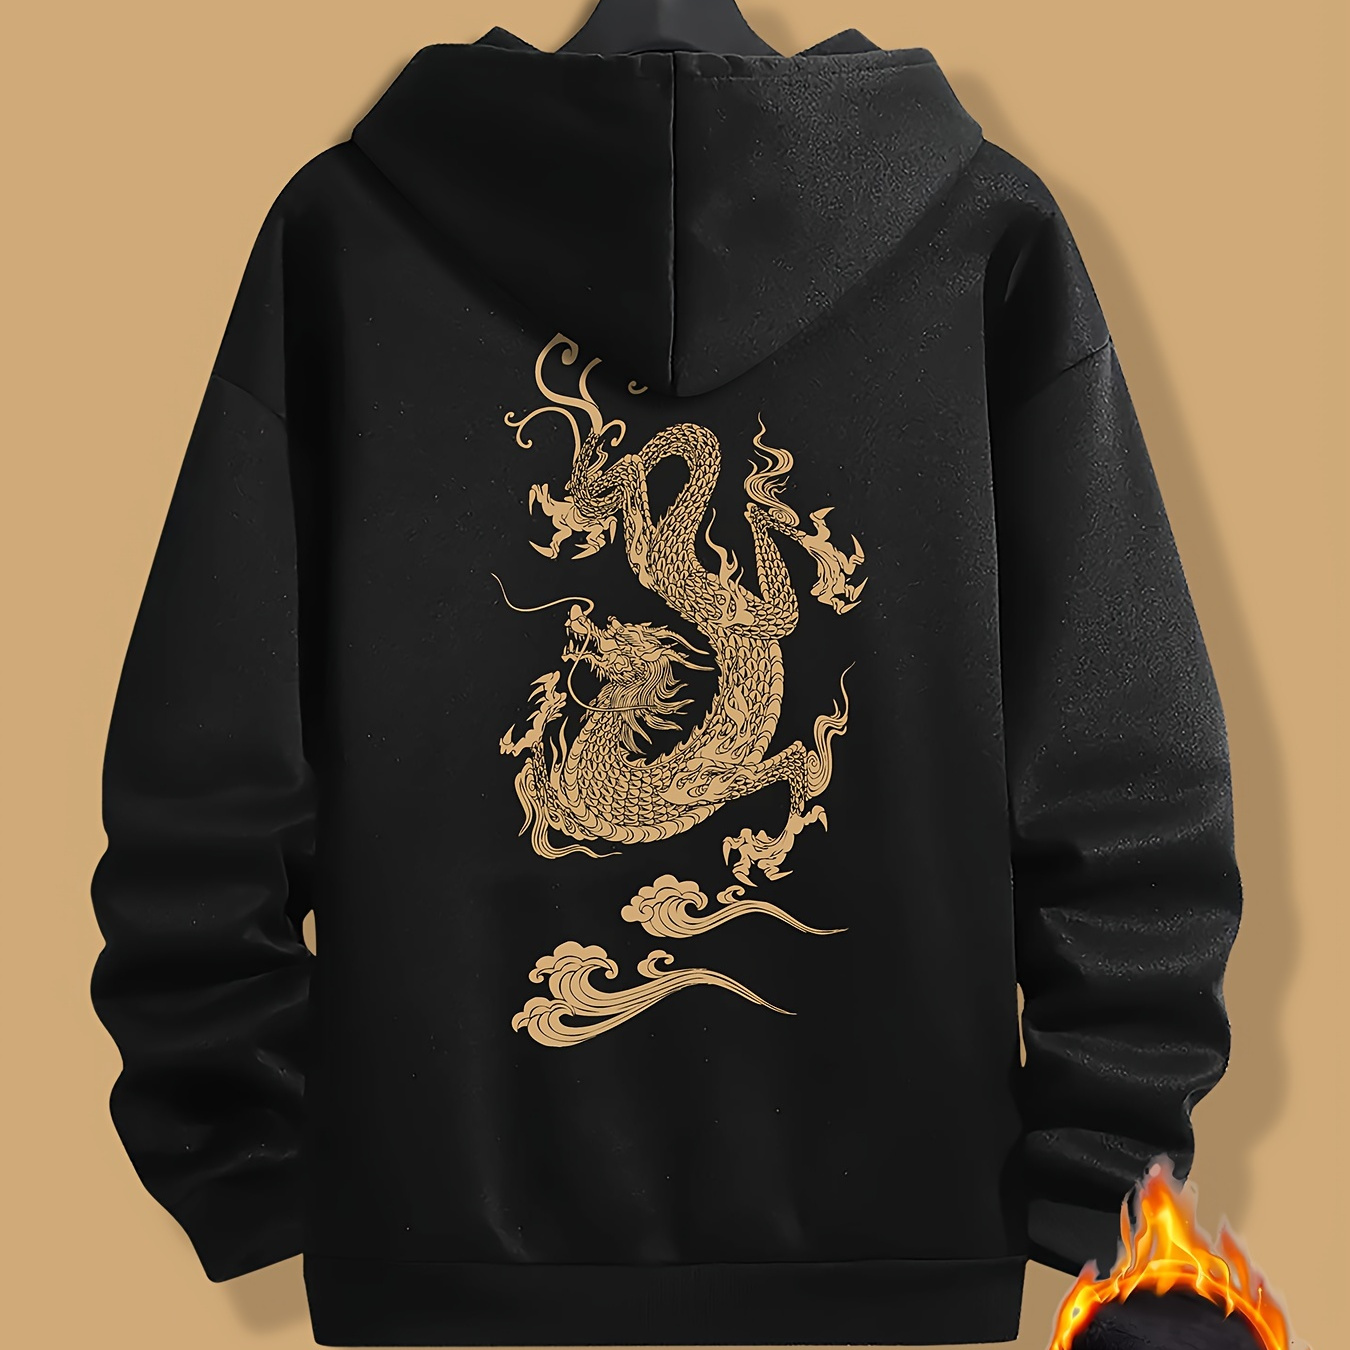 

Gold Dragon Graphic Print Sweatshirt, Artistic Graphic Design Hoodies With Fleece For Men, Men's Warm Slightly Flex Hooded Streetwear Pullover, For Fall And Winter, As Gifts